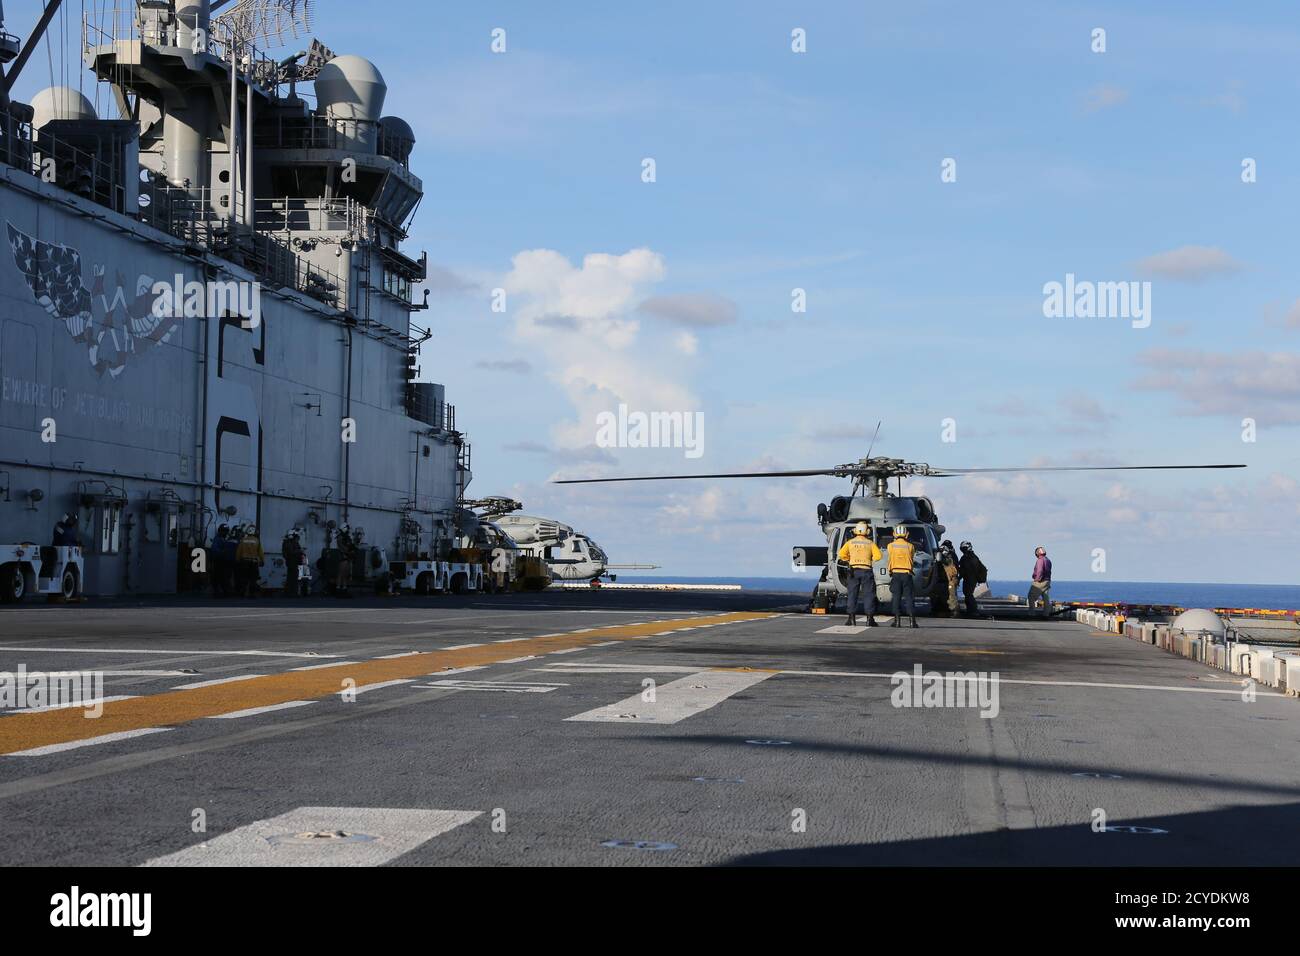 PHILIPPINE SEA (Sept. 27, 2020) U.S. Navy Sailors assigned to amphibious assault ship USS America (LHA 6) and Archangels of Helicopter Sea Combat Squadron (HSC) 25 Detachment 6 prepare an MH-60S Sea Hawk helicopter for takeoff from America’s flight deck. America, flagship of Expeditionary Strike Group Seven (ESG 7), along with the 31st Marine Expeditionary Unit, is operating in the U.S. 7th Fleet area of operations to enhance interoperability with allies and partners and serve as a ready response force to defend peace and stability in the Indo-Pacific region. (U.S. Marine Corps photo by 1st Lt Stock Photo